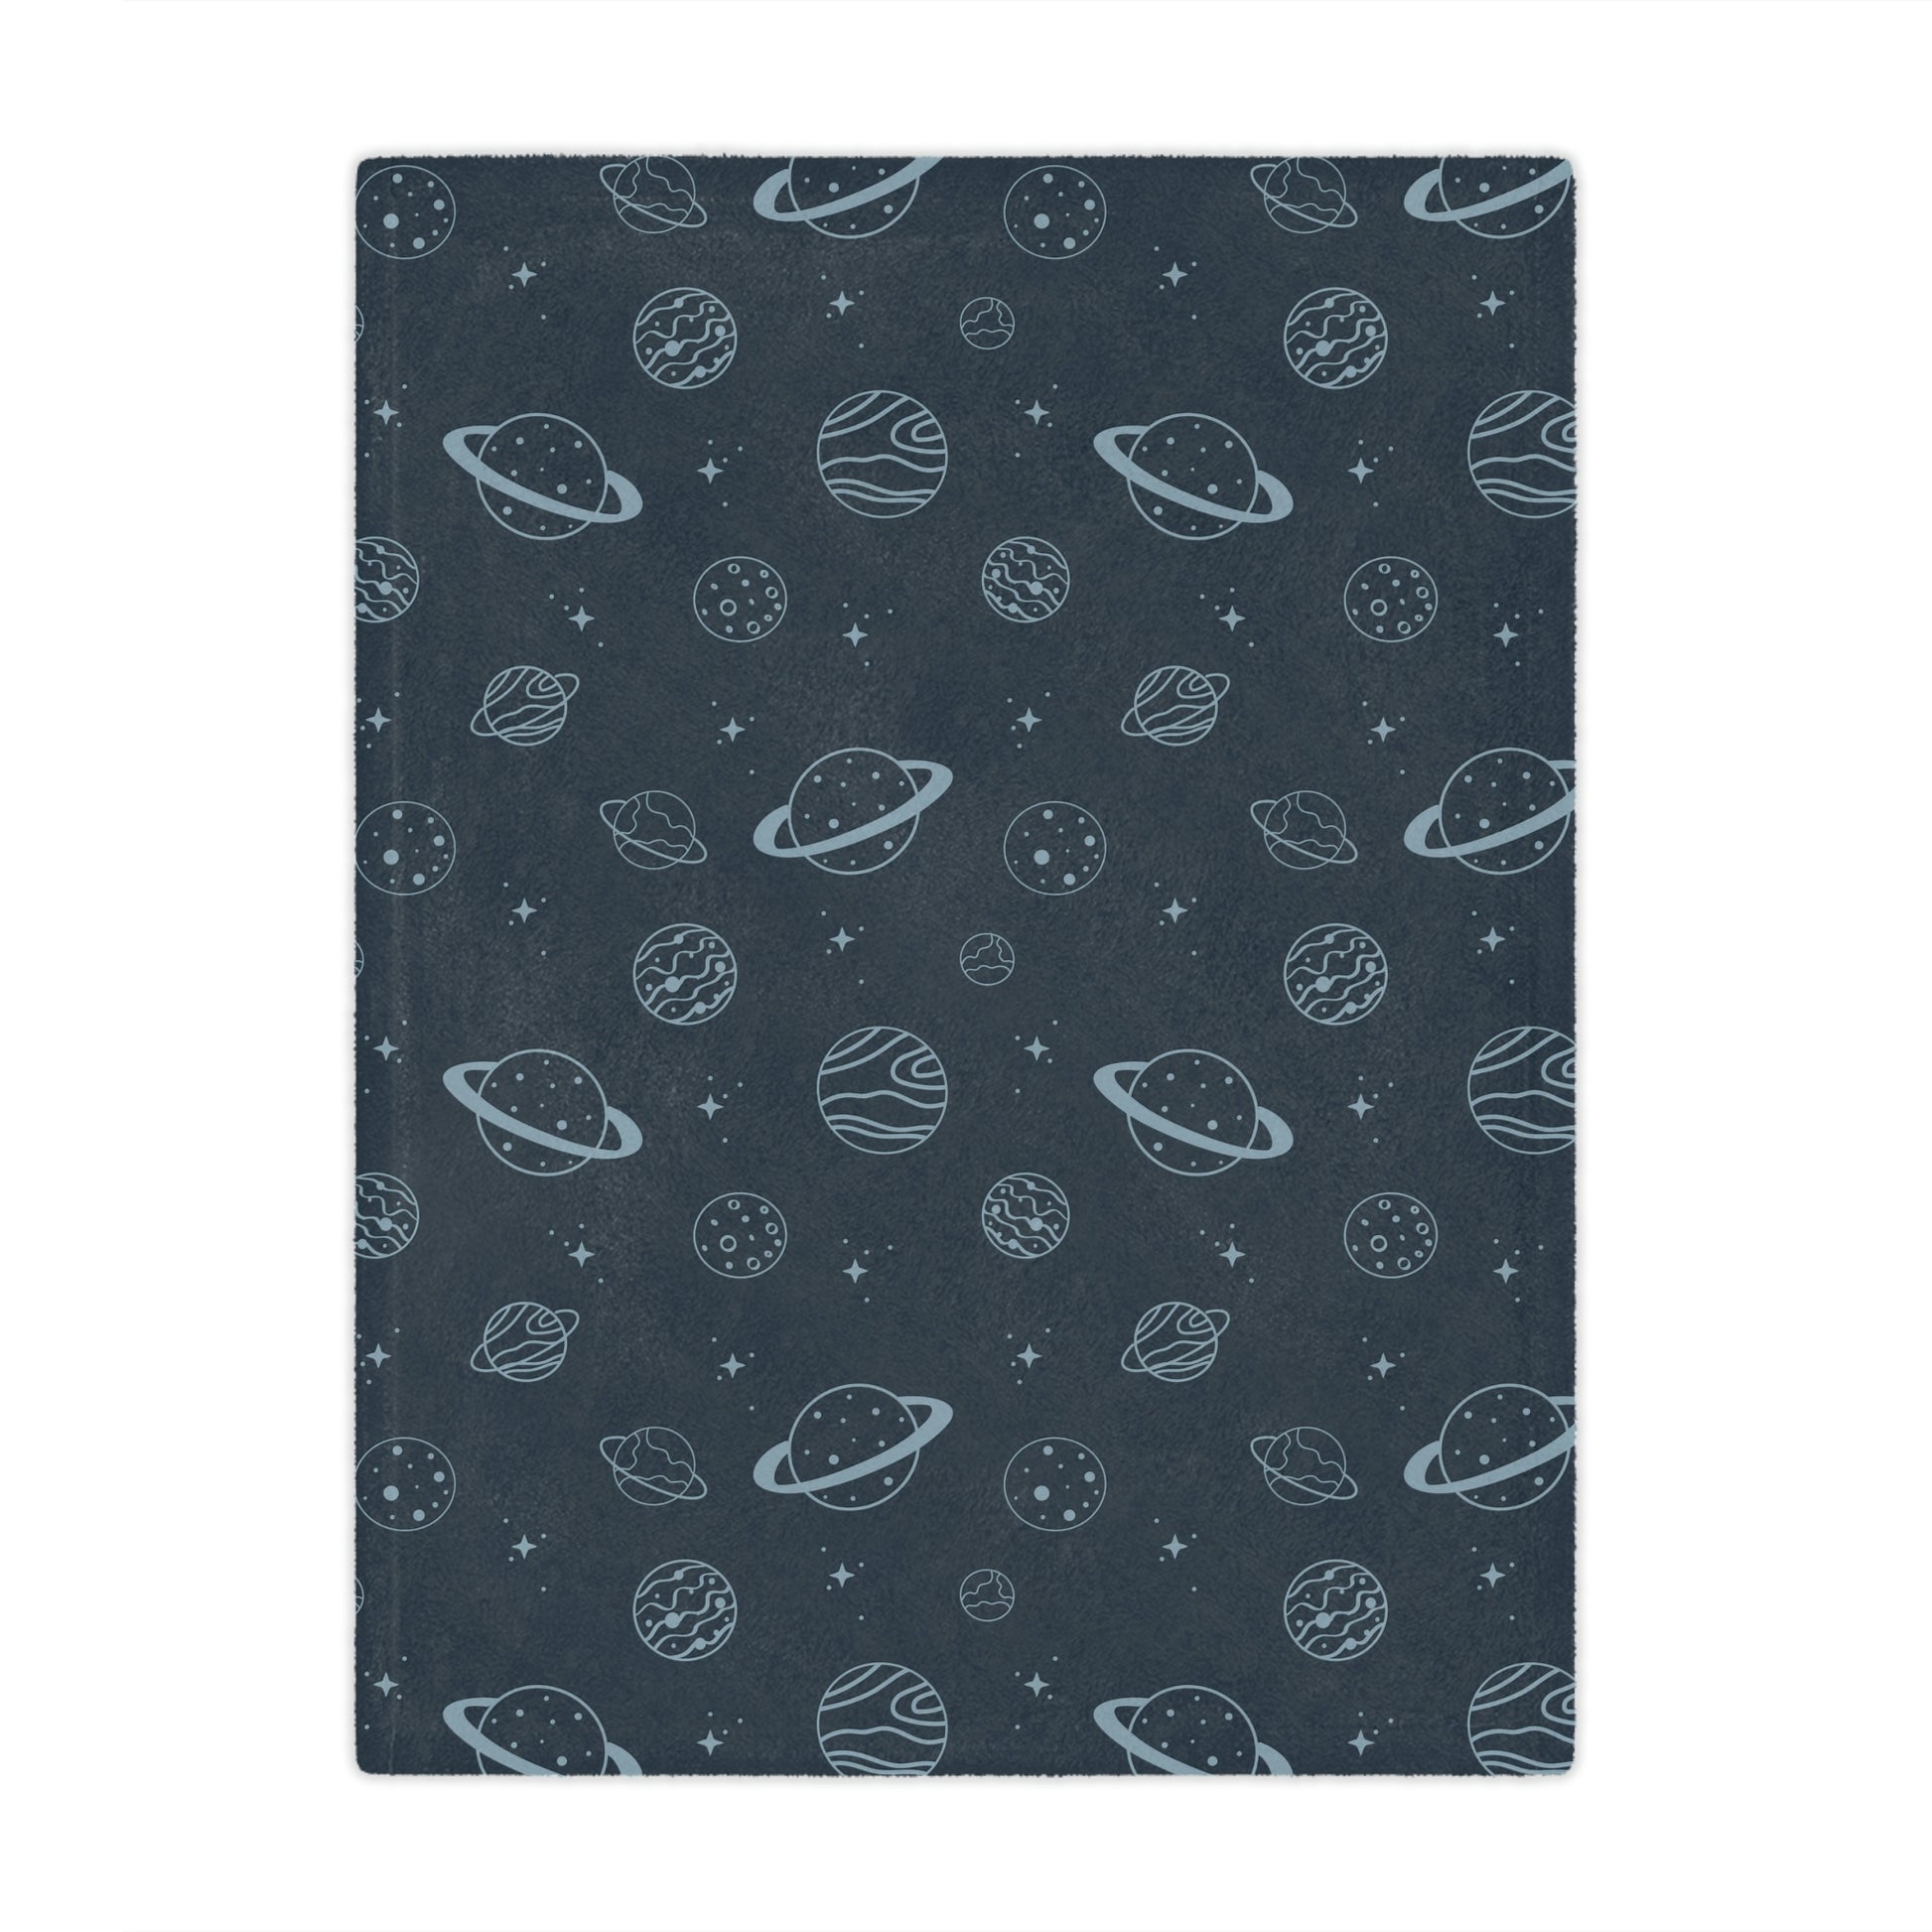 planet theme blanket in a space theme nursery or childs playroom bed, blue space theme throw blanket on a bed in a planet inspired room